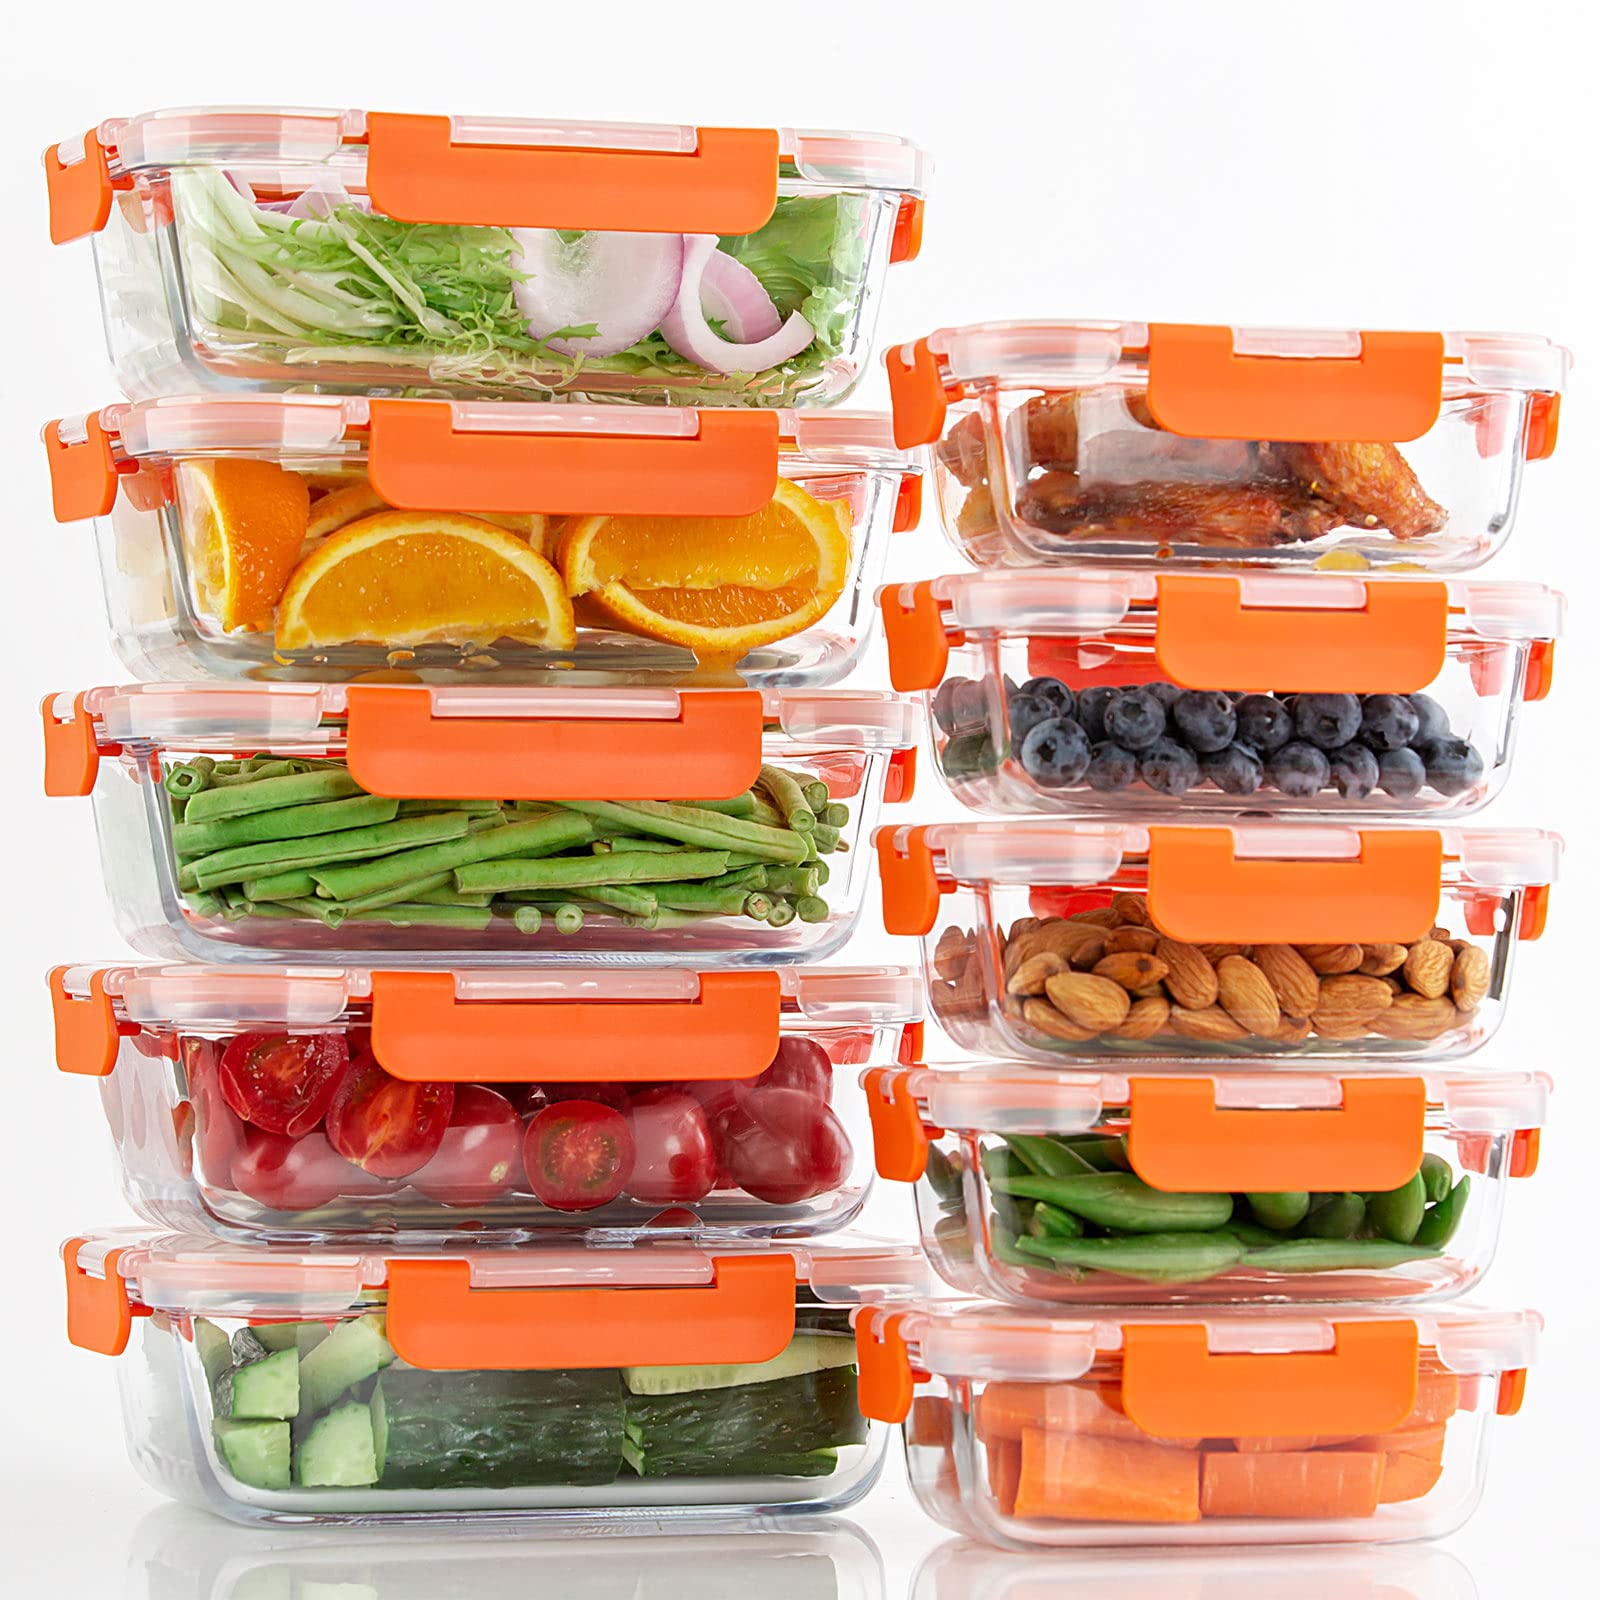 UMEIED 10 Pack Glass Food Storage Containers with Lids Leakproof, Airtight Glass Meal Prep Containers For Lunch, On The Go, Leftover, Dishwasher Safe